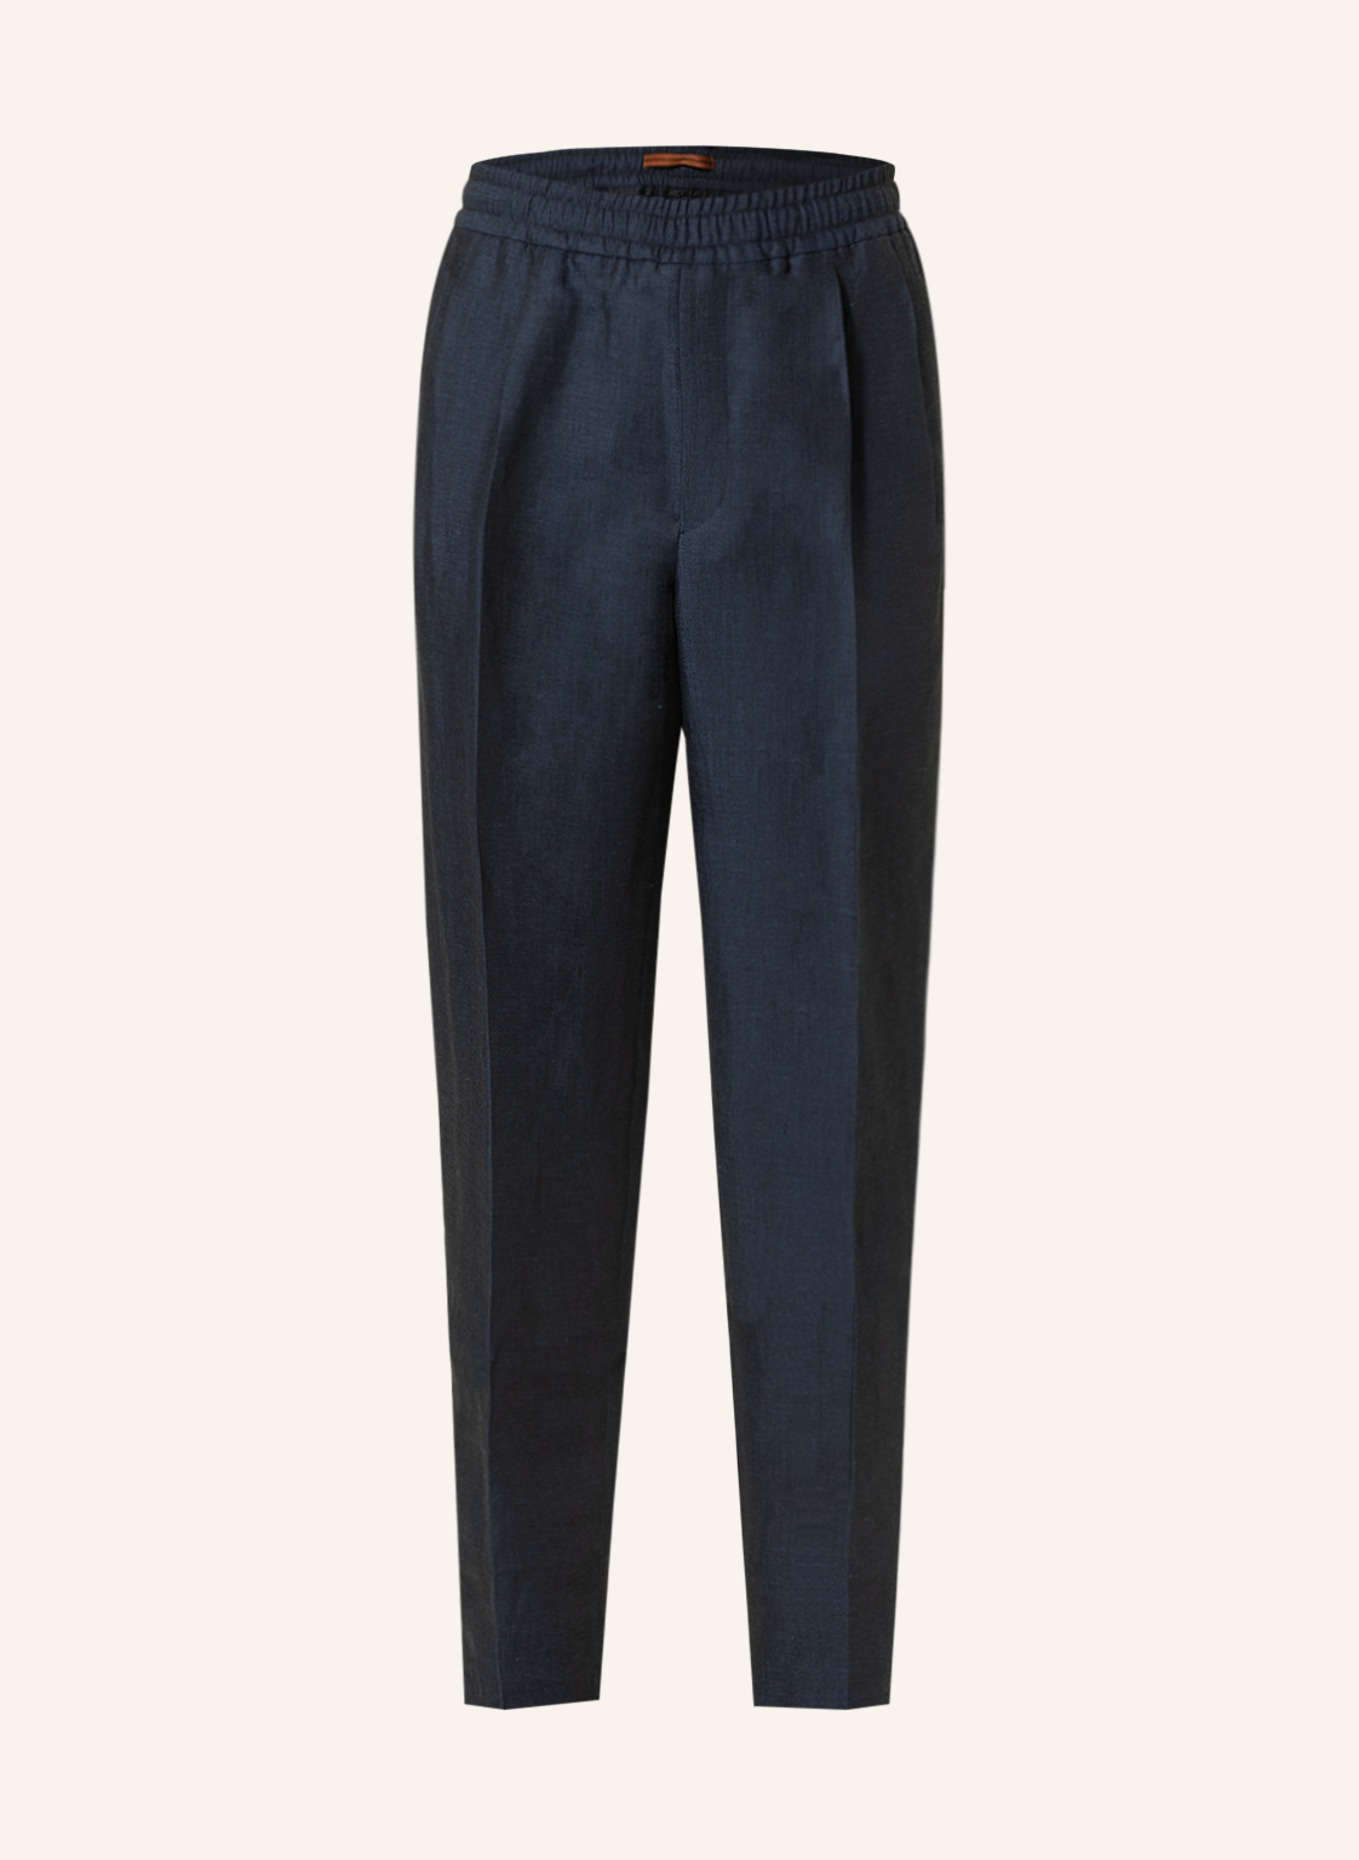 ZEGNA Pants in jogger style with linen, Color: DARK BLUE (Image 1)